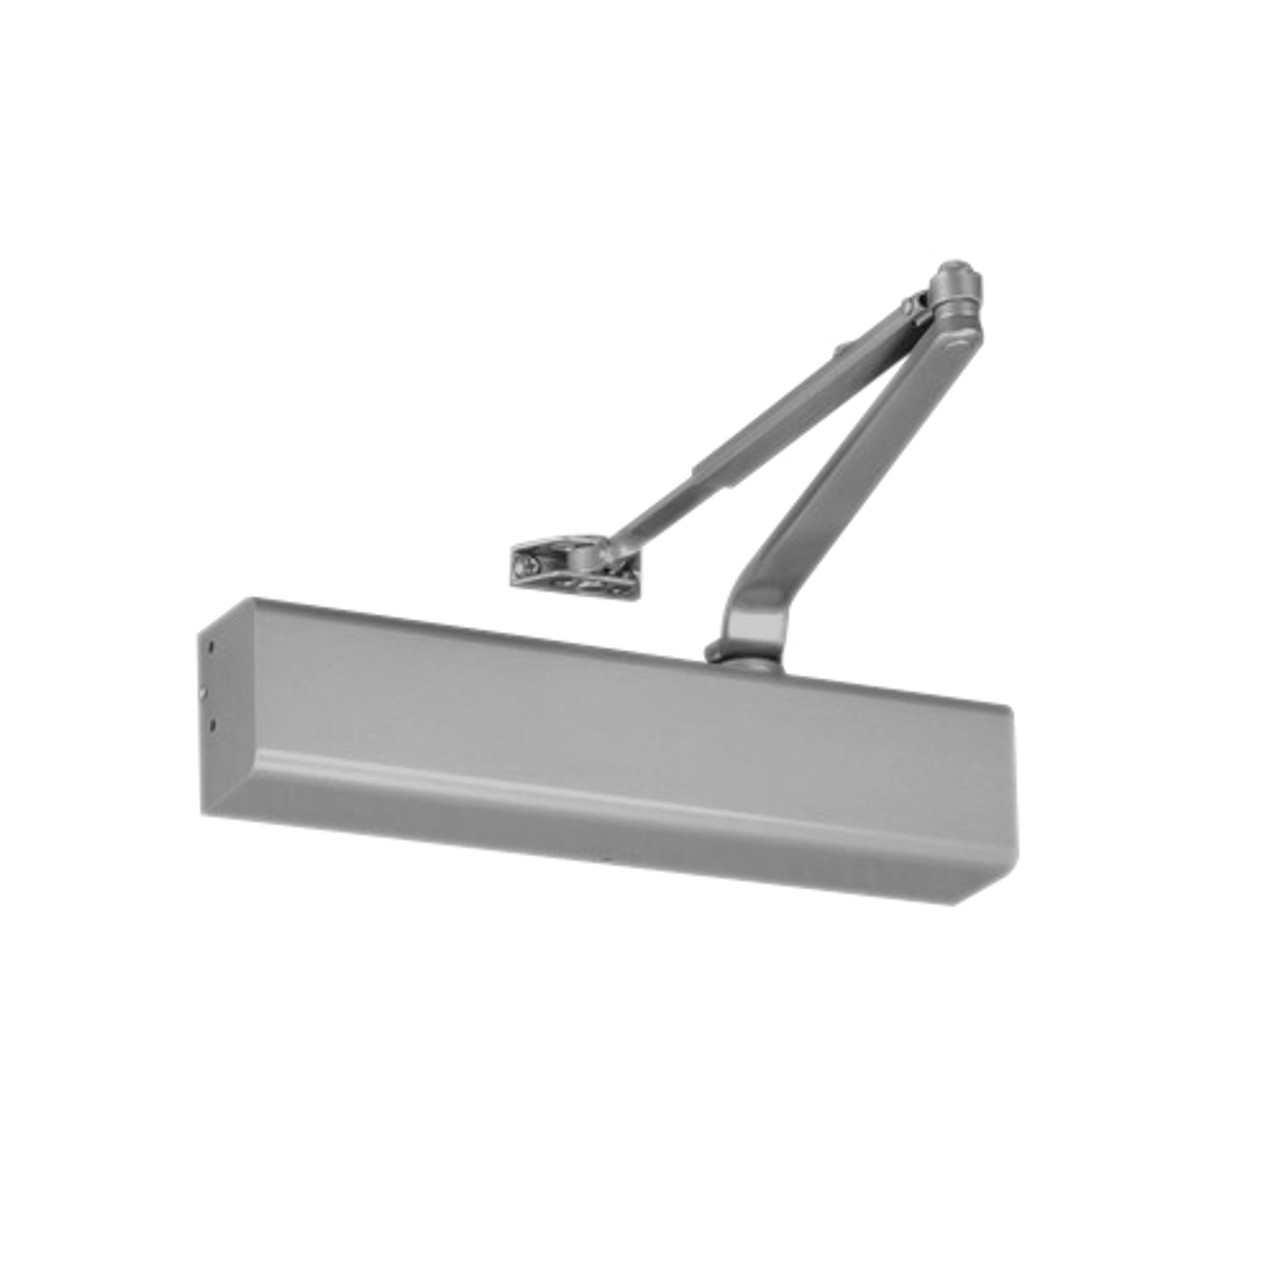 S8501-689 Norton 8000 Series Full Cover Non-Hold Open Door Closers with Regular Arm Application in Aluminum Finish